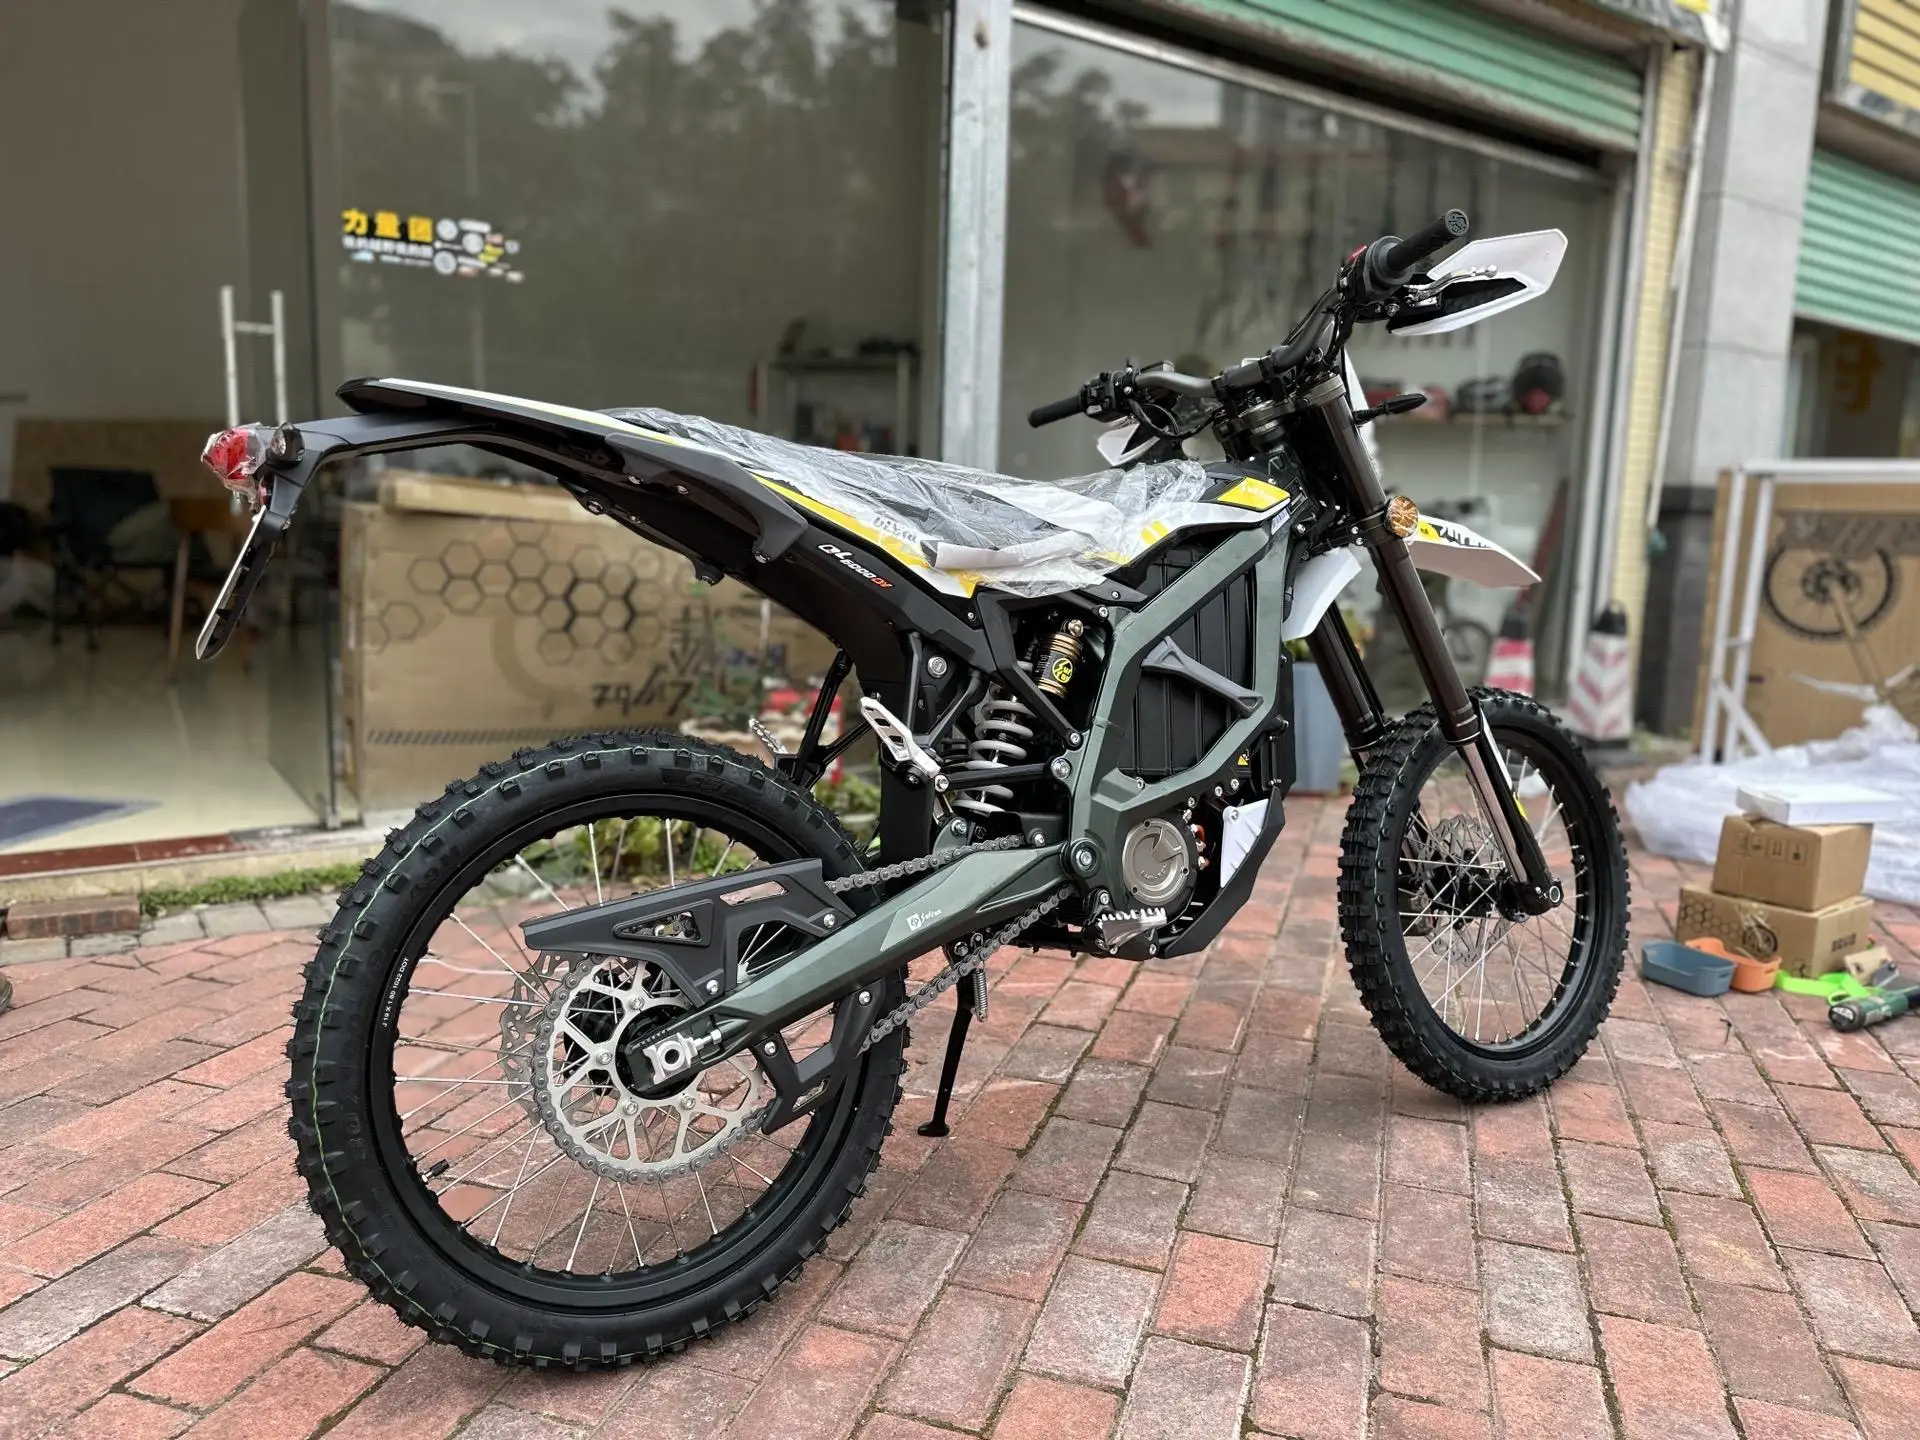 

NEW DISCOUNT SALES ON Surron ultra bee bike 74V 55Ah Dirt eBike 90Km/h 12.5Kw Max Power Off Road Sur Ron Electric Motorcycle